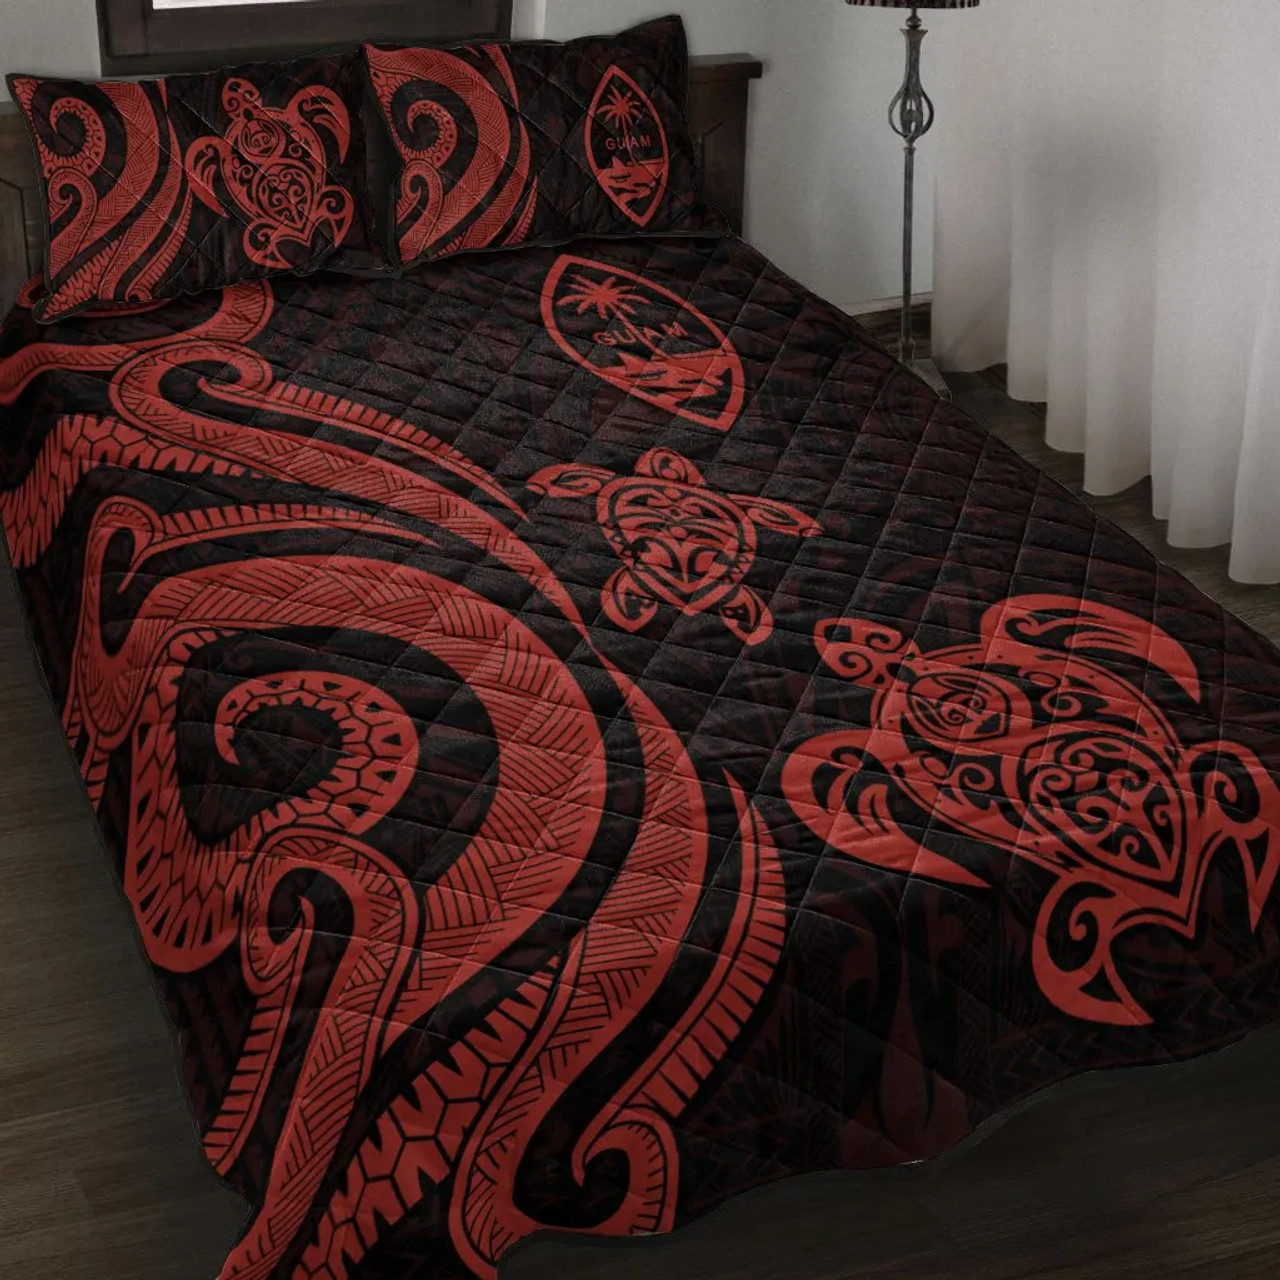 Guam Quilt Bed Set - Red Tentacle Turtle 1